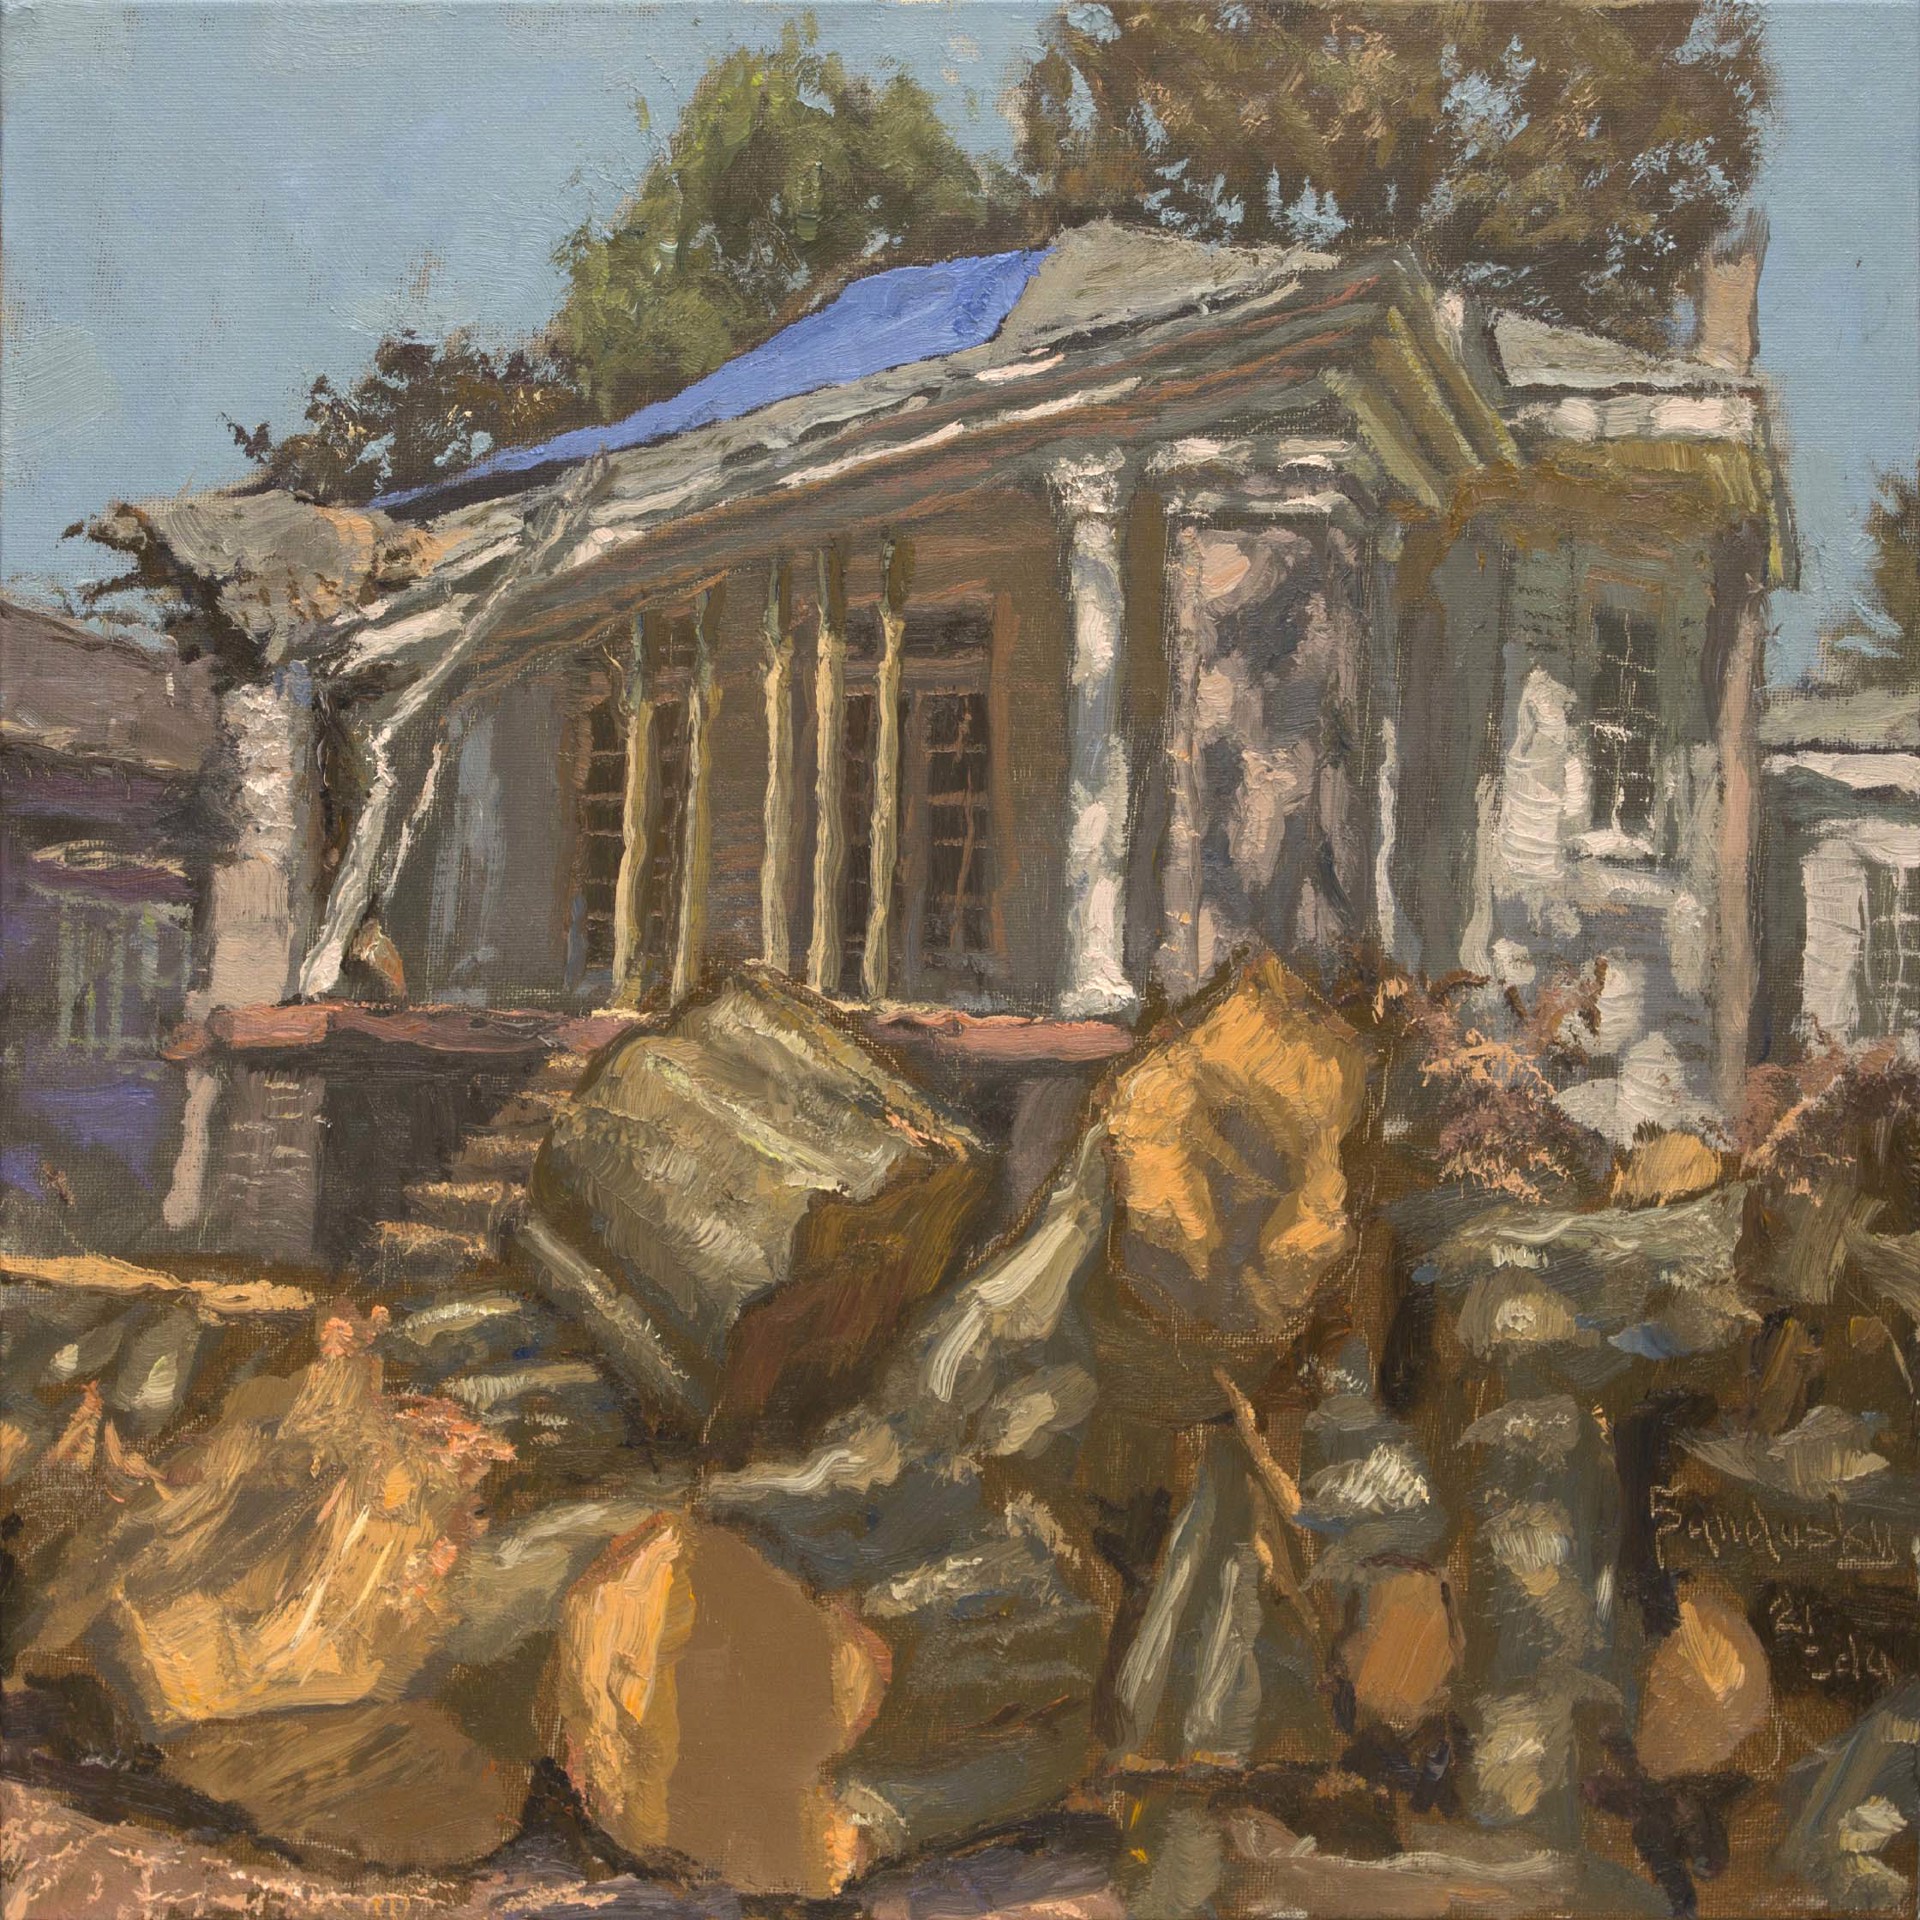 Cut Wood and Wrecked House by Phil Sandusky